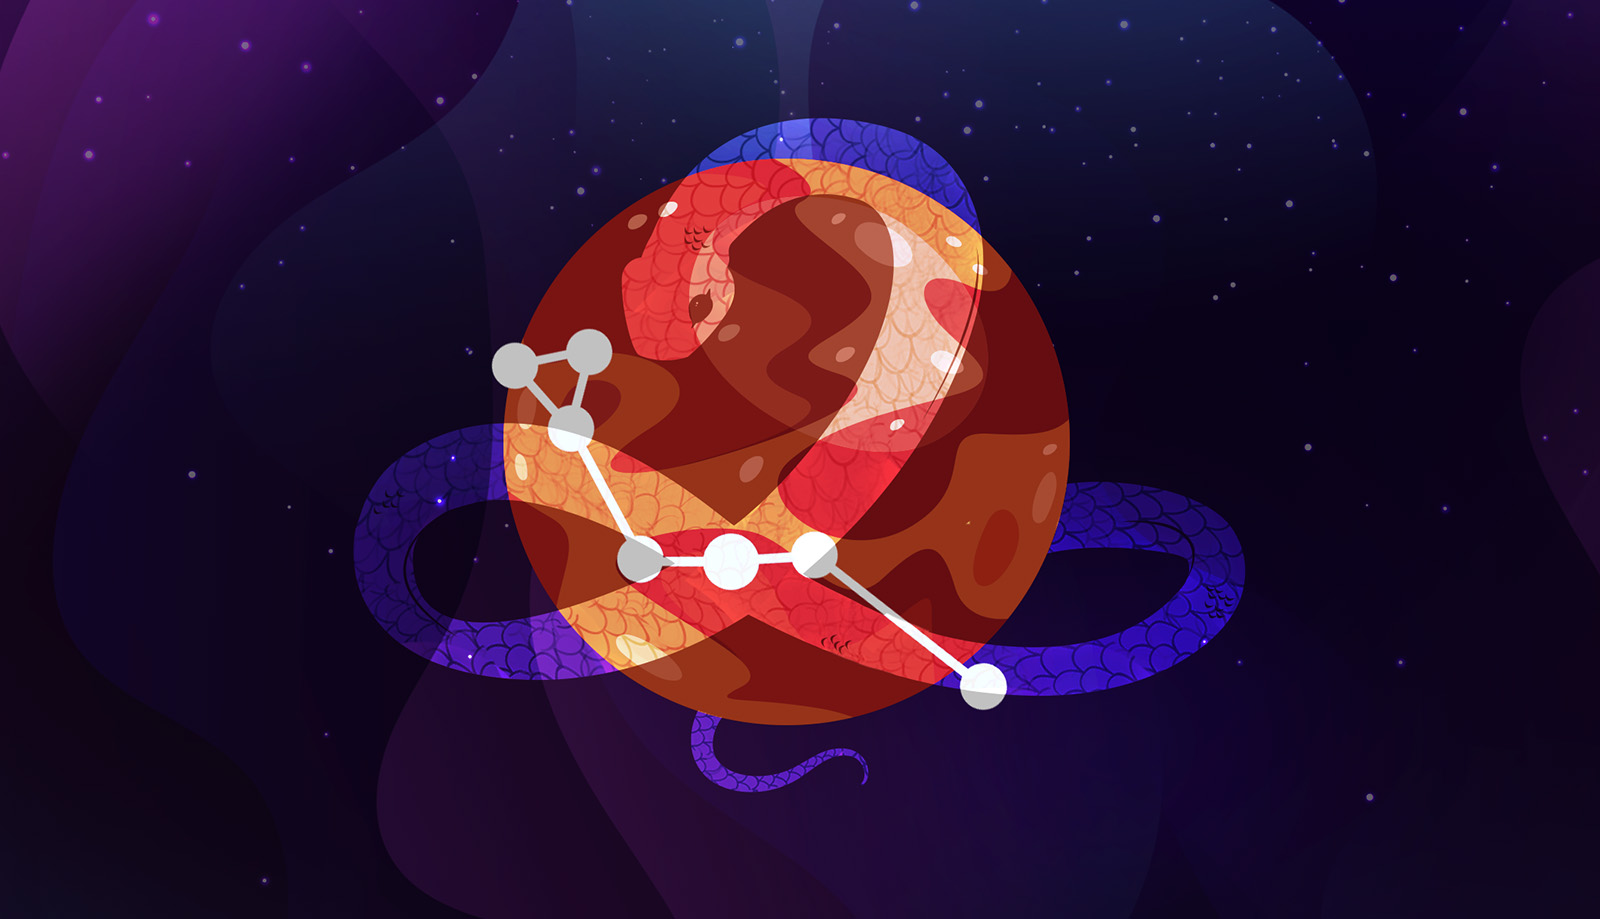 Pictorial representation of the APT Agonizing Serpens. An illustrated orange and red snake is highlighted by a red circle against a night sky. The constellation serpens.